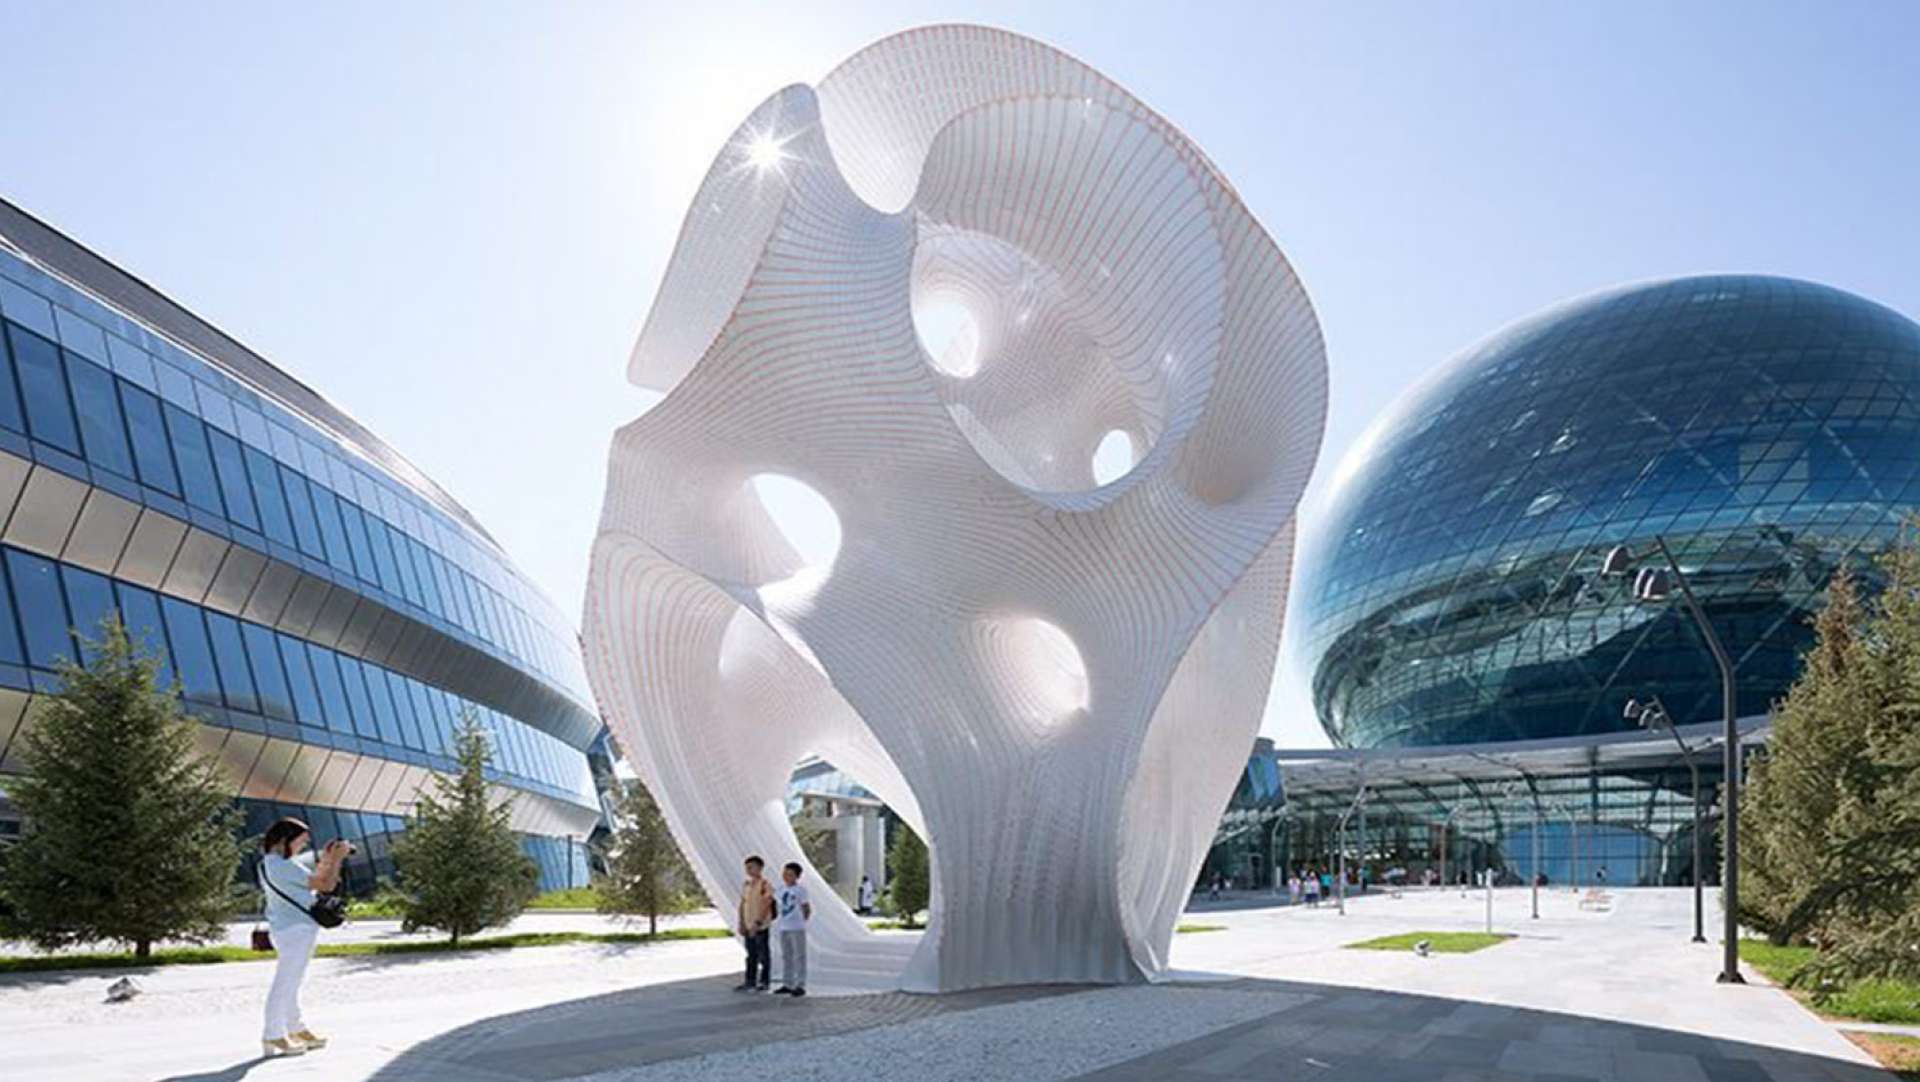 A Towering 4-Story Organic Structure Built From Material as Thin as a Coin by Christopher Jobson